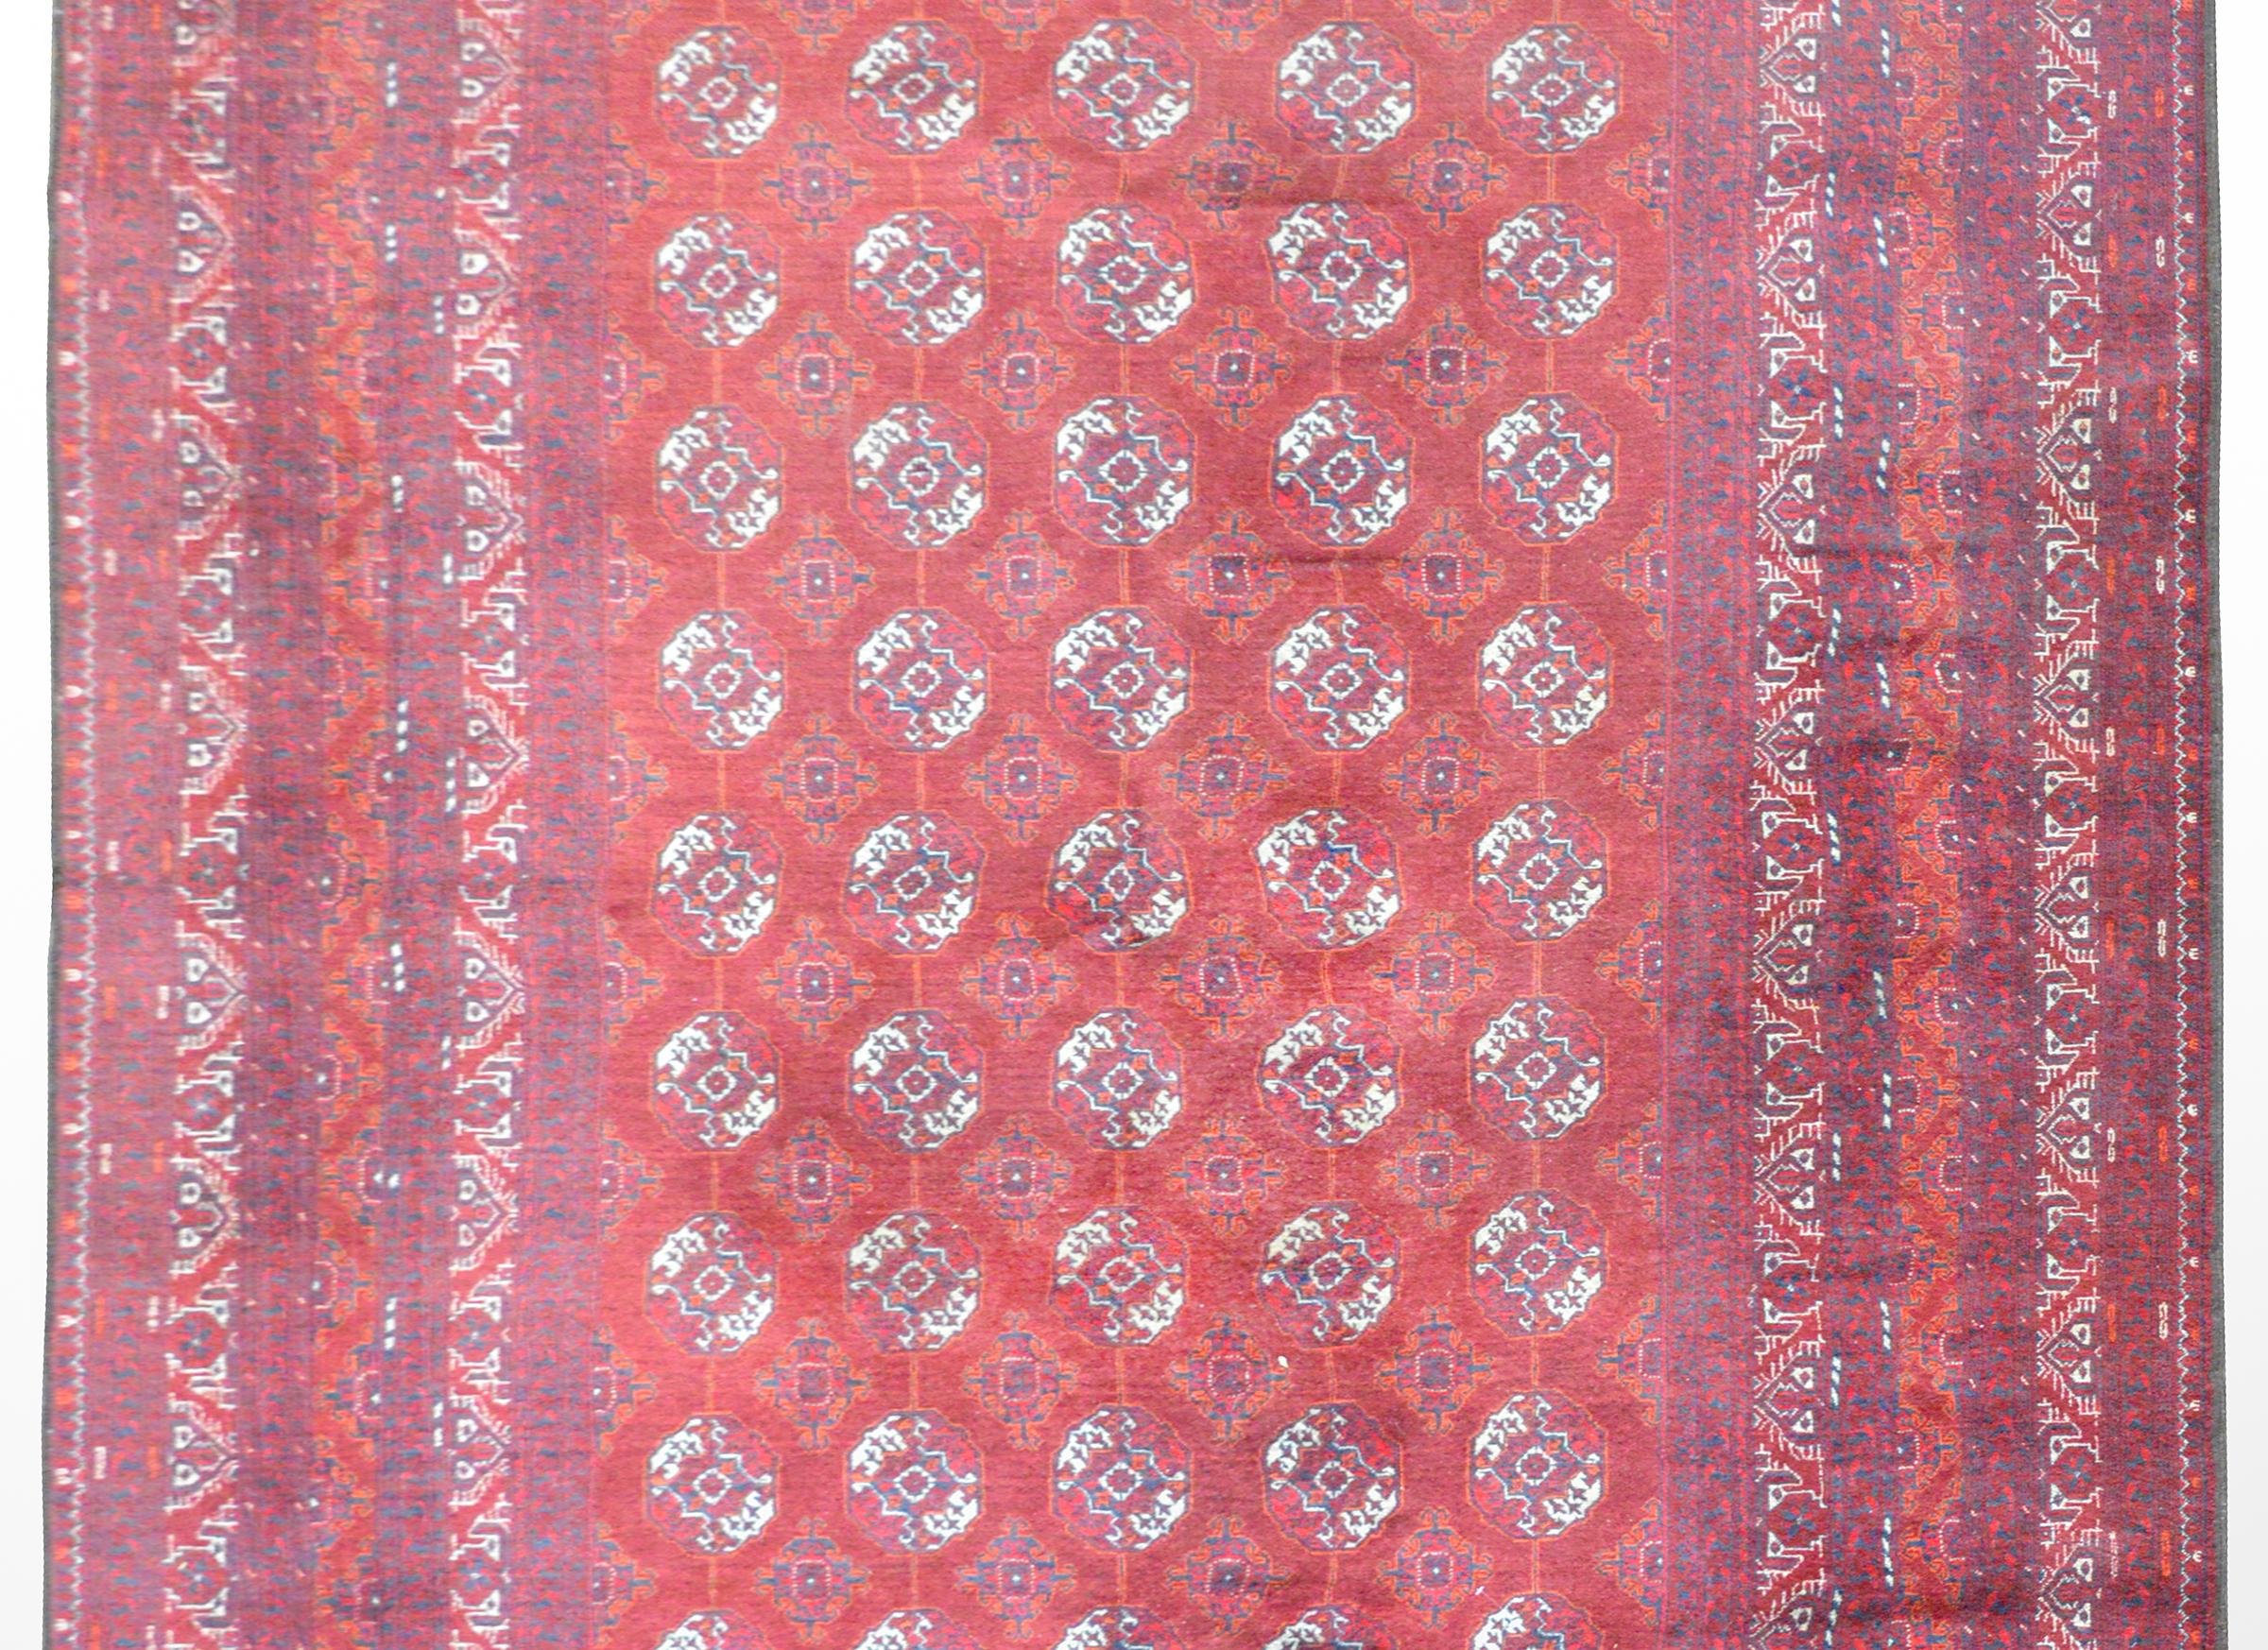 A beautiful 20th century Afghani Turkoman rug with a repeated circular pattern woven in crimson, orange, white and indigo surrounded by a wide border containing multiple geometric and floral patterned stripes.